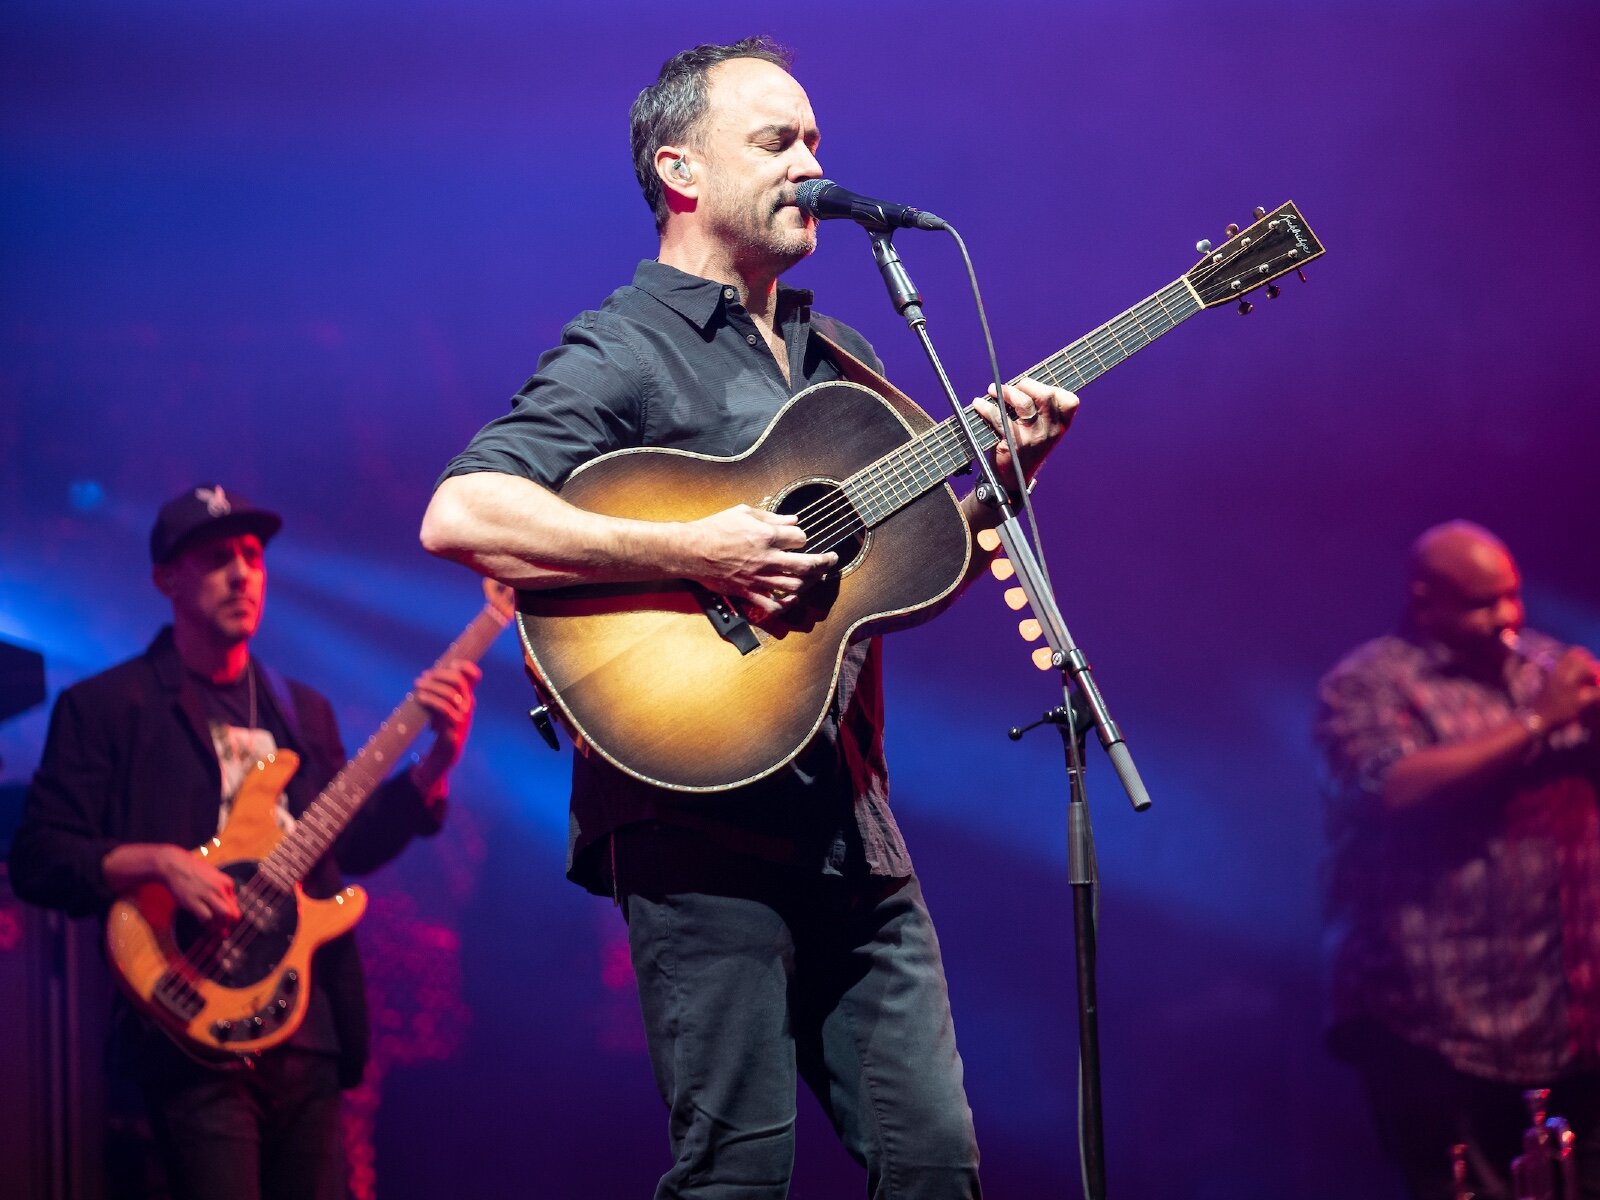 6 awesome images from Dave Matthews Band's return to Summerfest